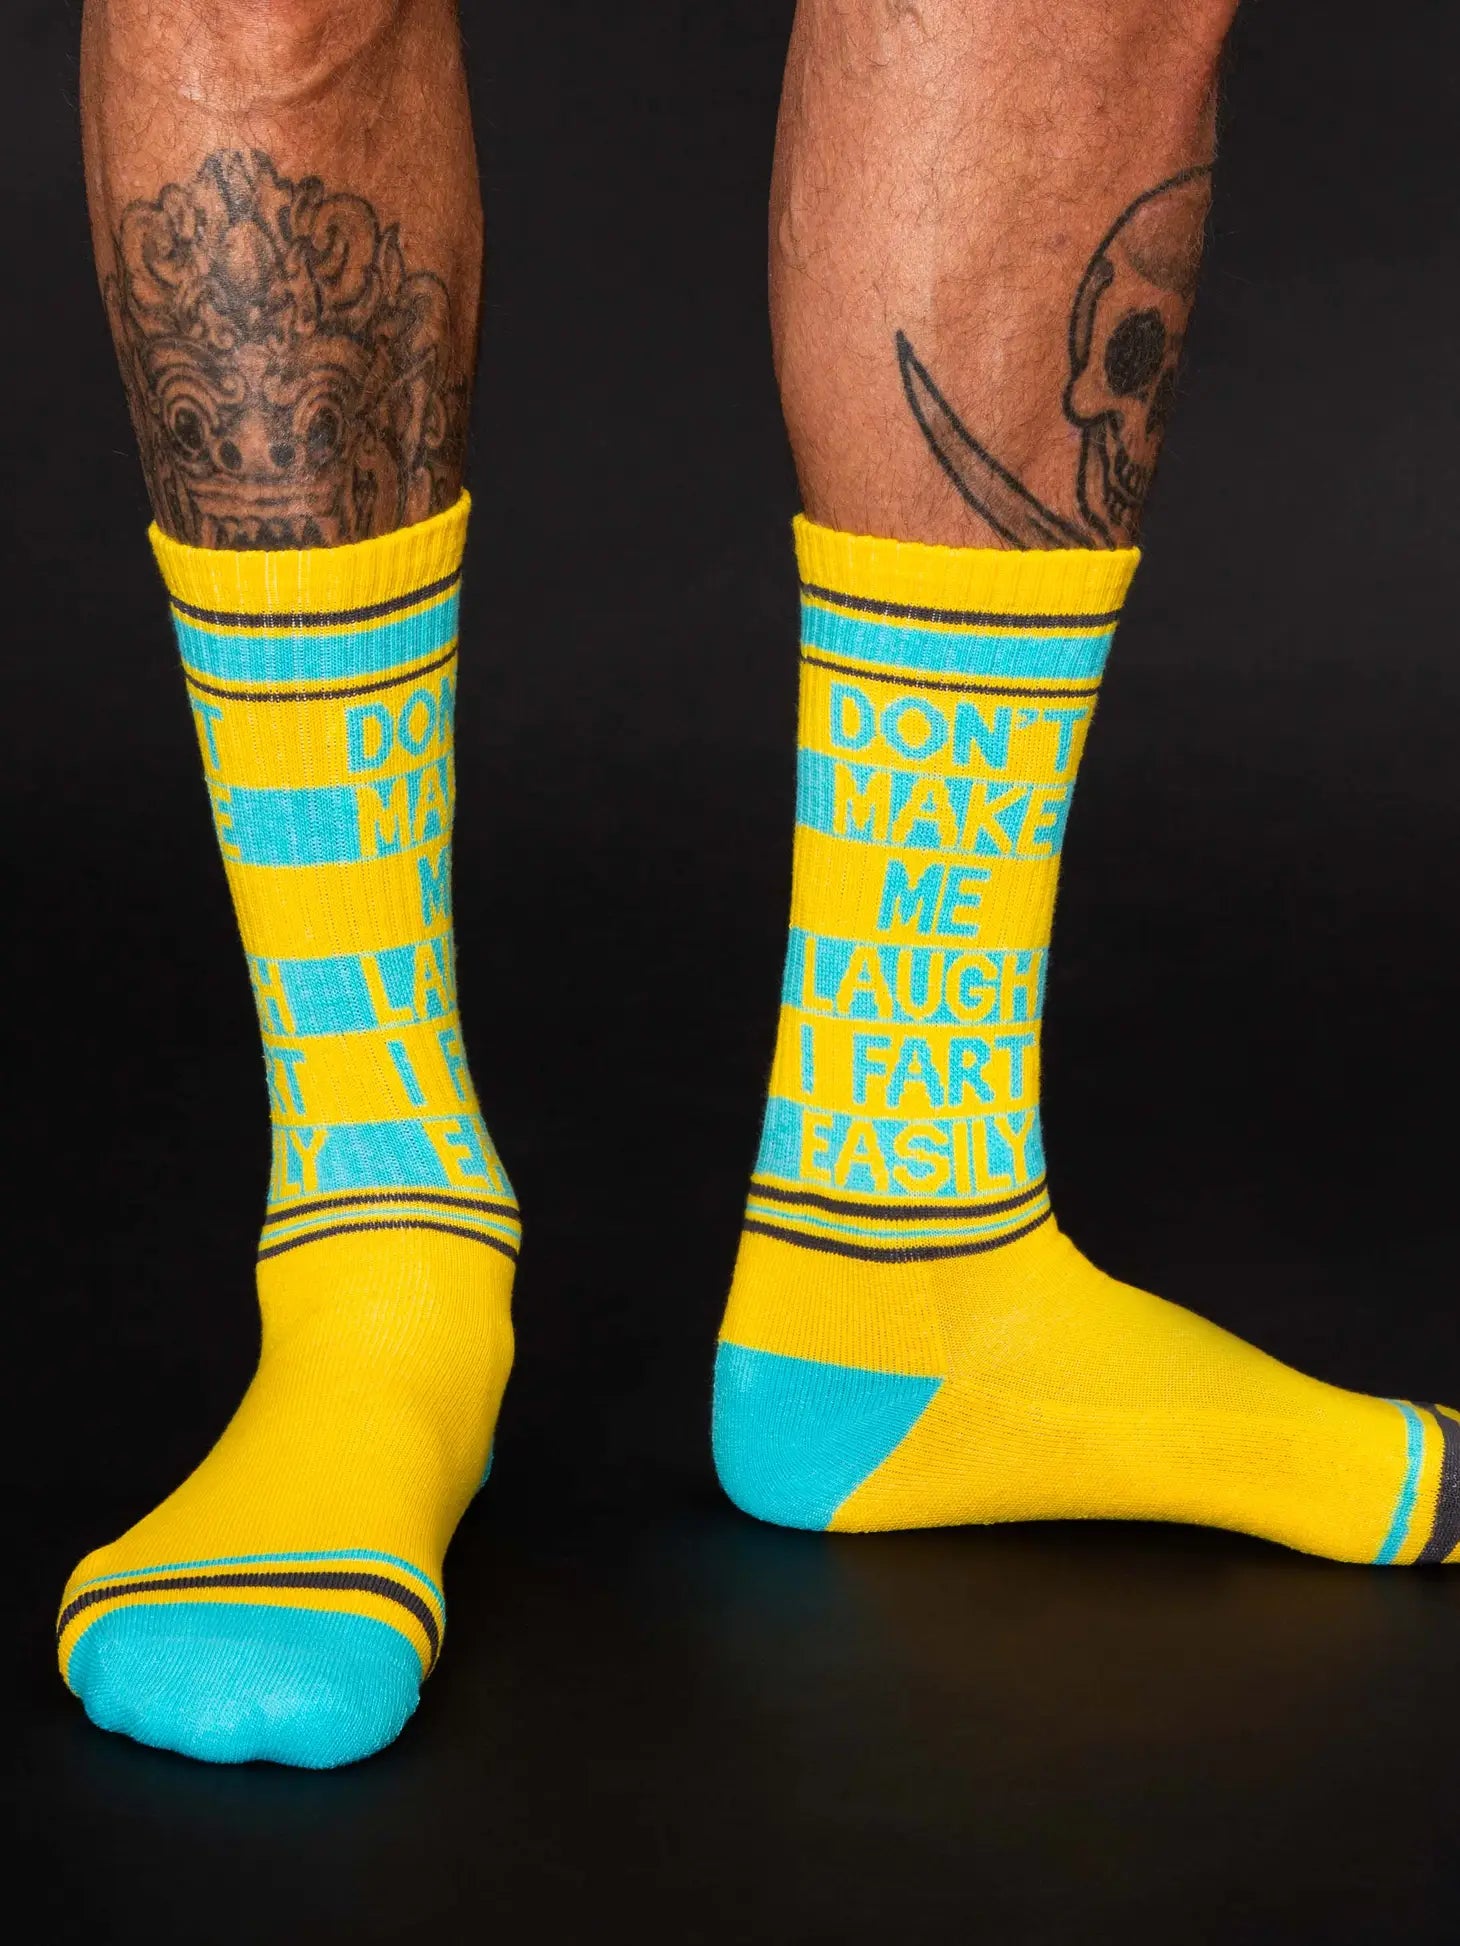 I'm Too Old for This Shit - Gym Crew Socks – Gumball Poodle